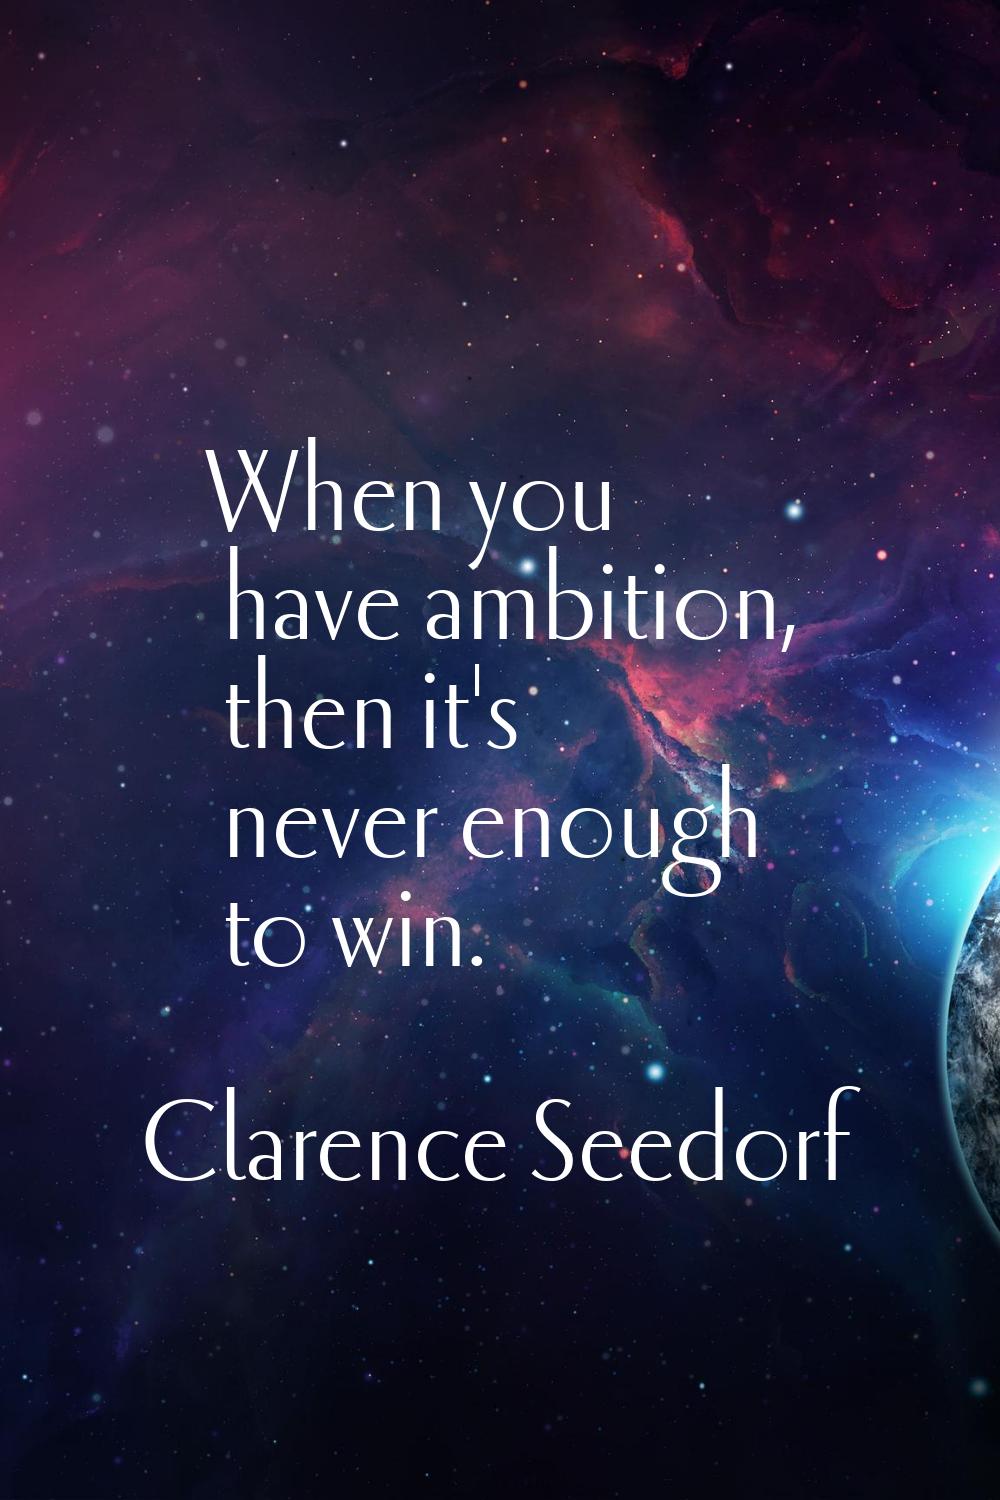 When you have ambition, then it's never enough to win.